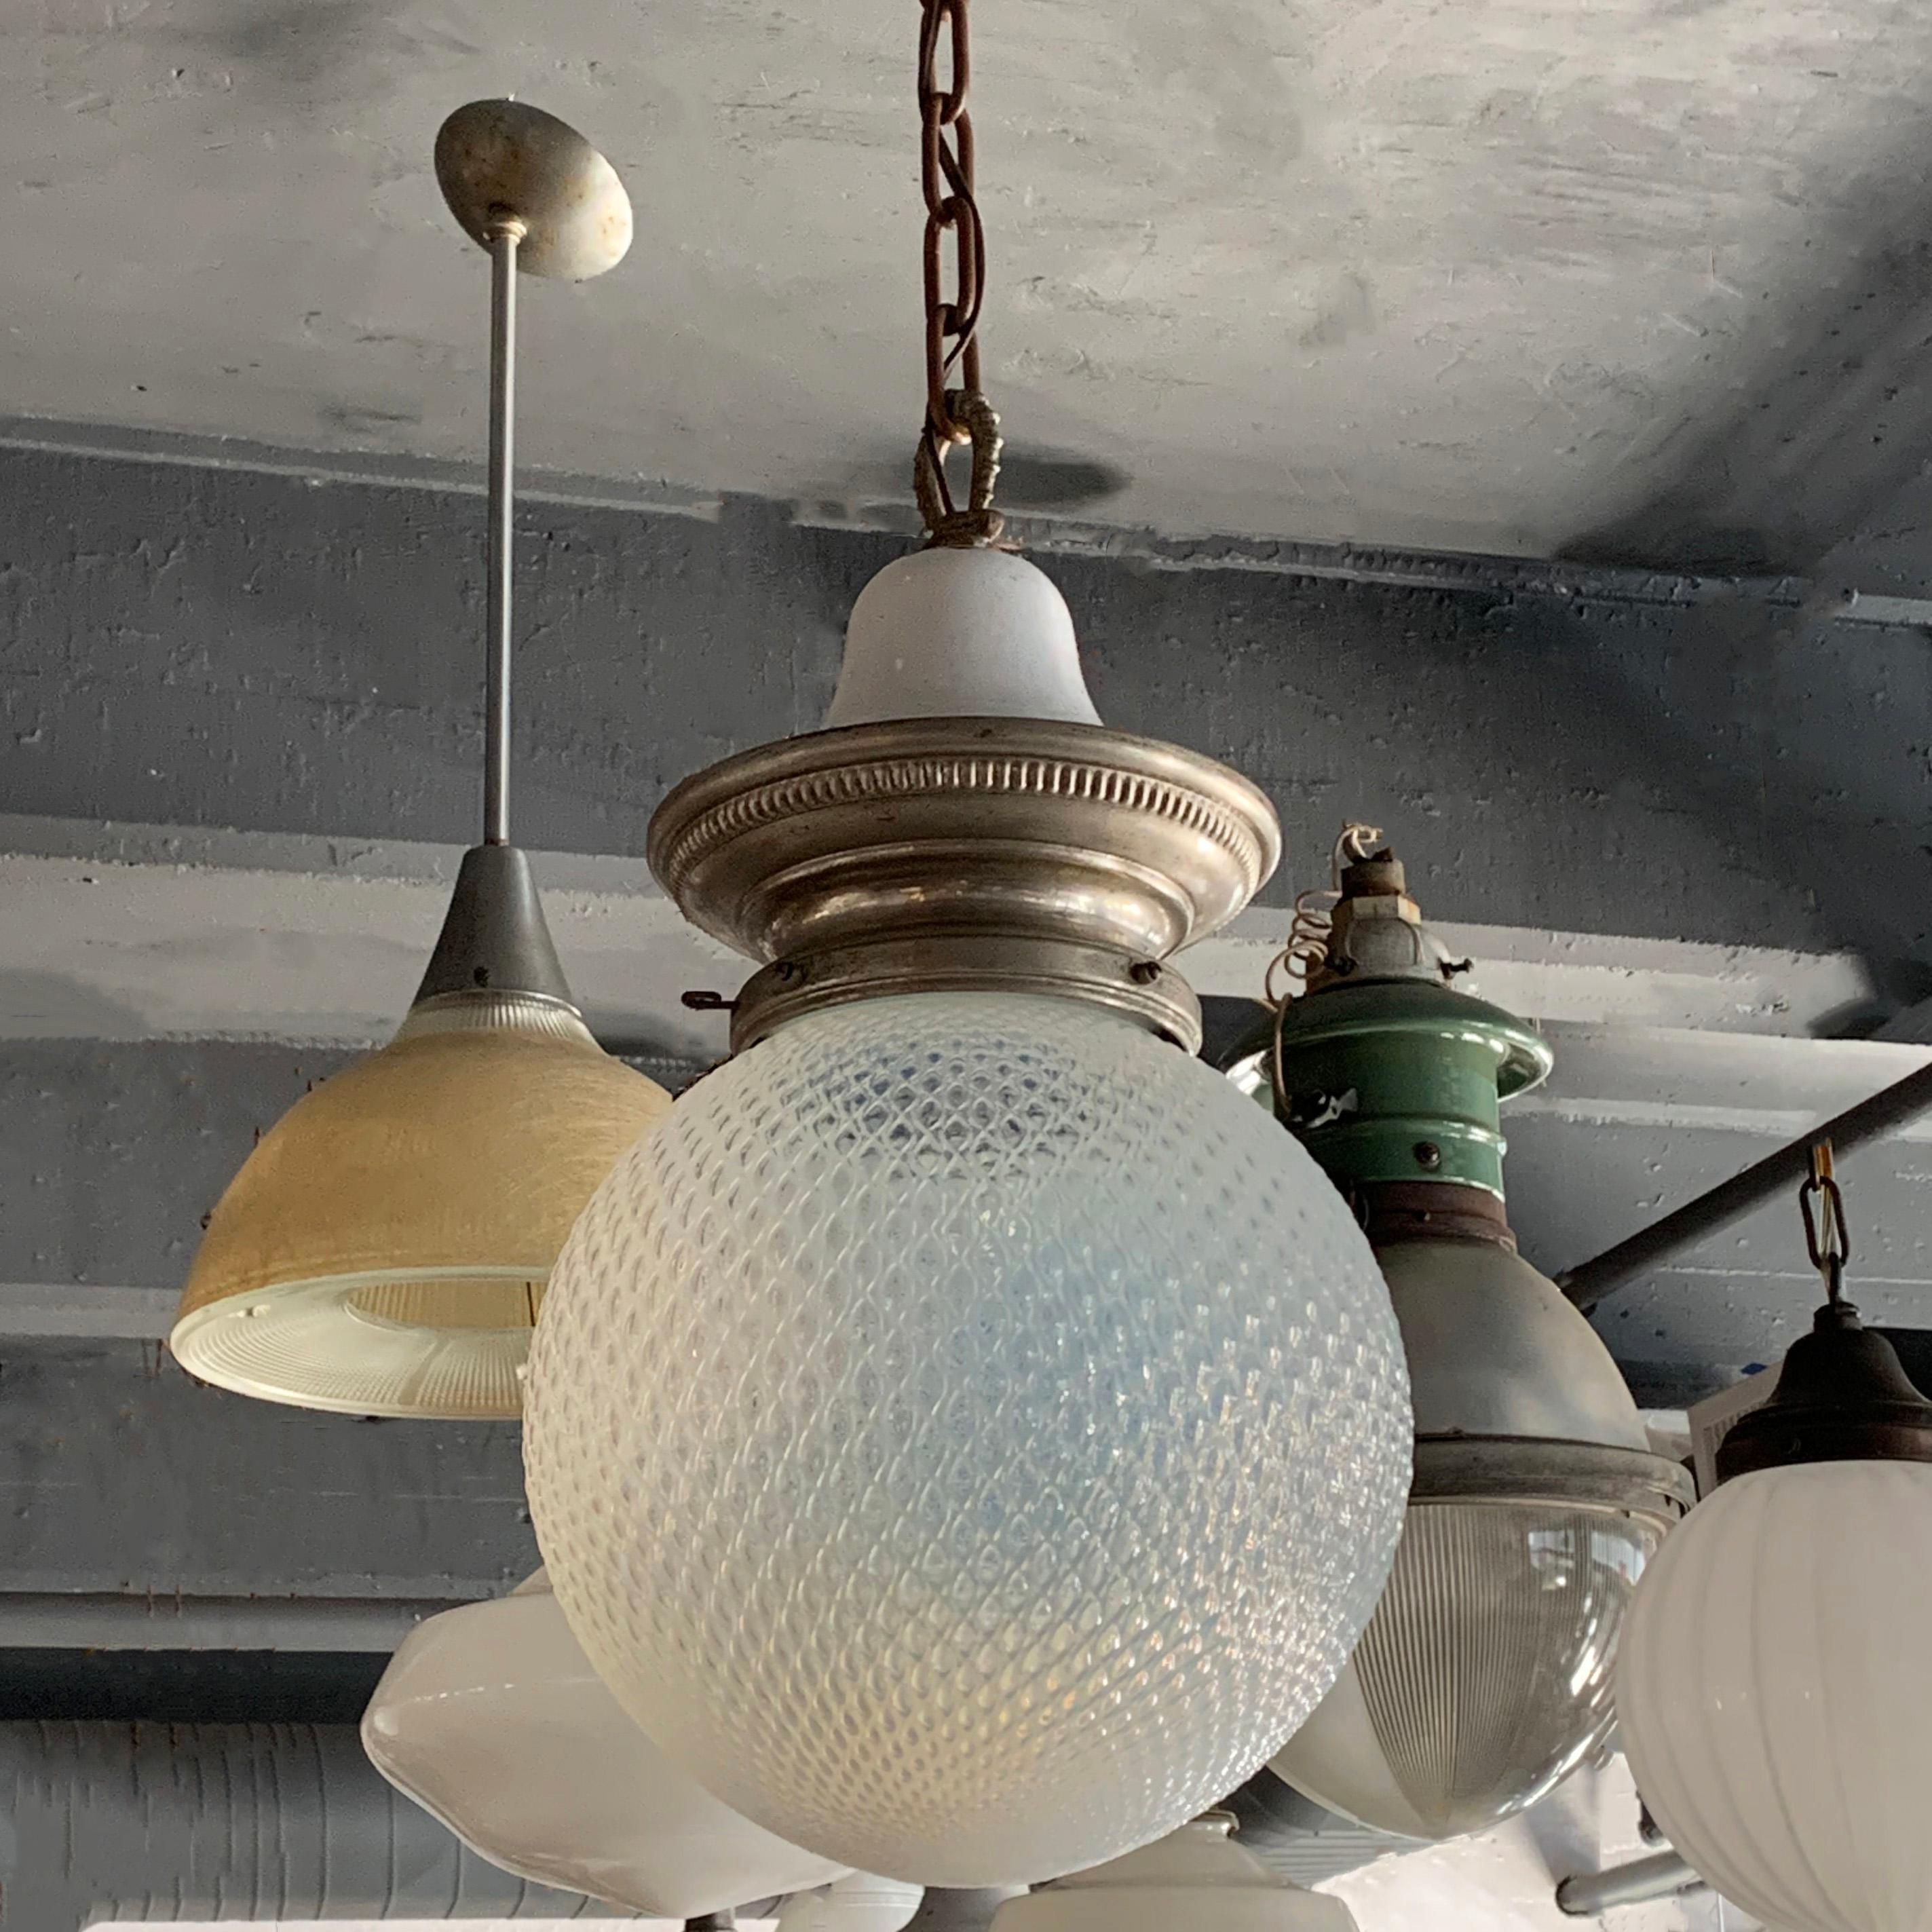 Early 20th century, library pendant light features a patterned, opaline glass globe shade with nickel-plated brass and porcelain enameled crown fitter, brass chain and canopy is wired to accept up to a 300 watt bulb. The overall height is 48 inches